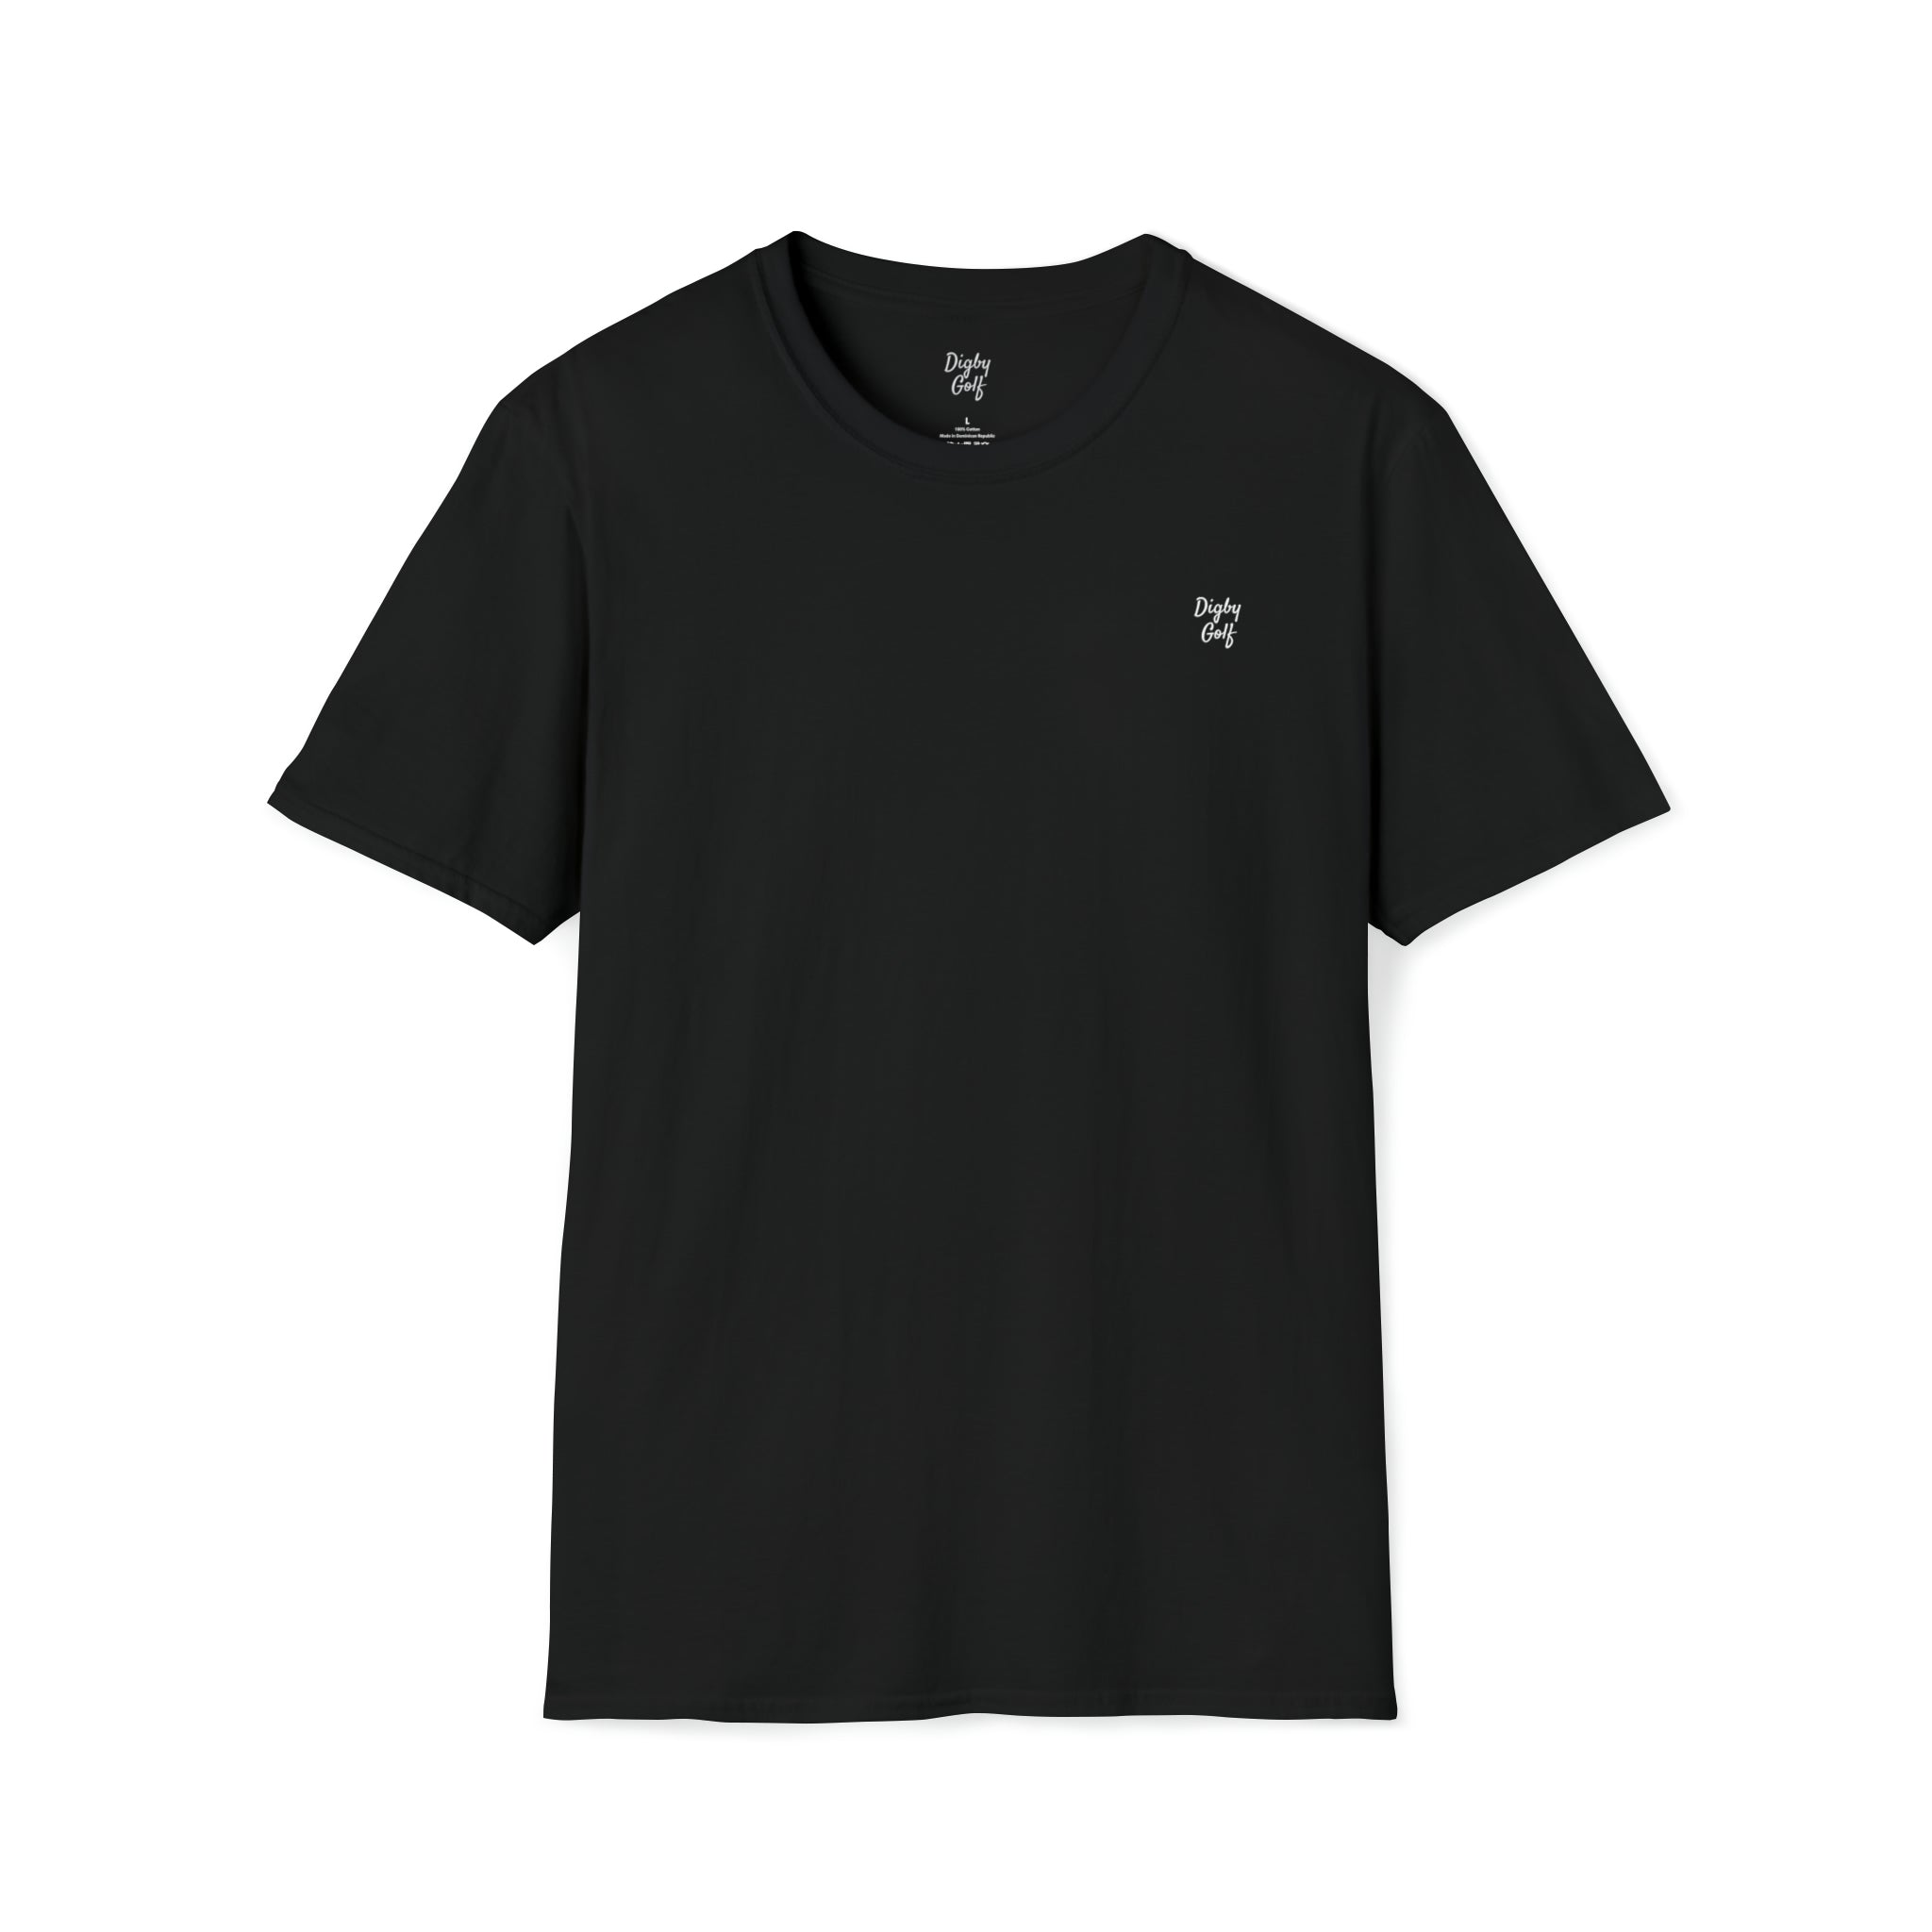 Weekend Hacker Digby Golf Unisex Softstyle T-Shirts